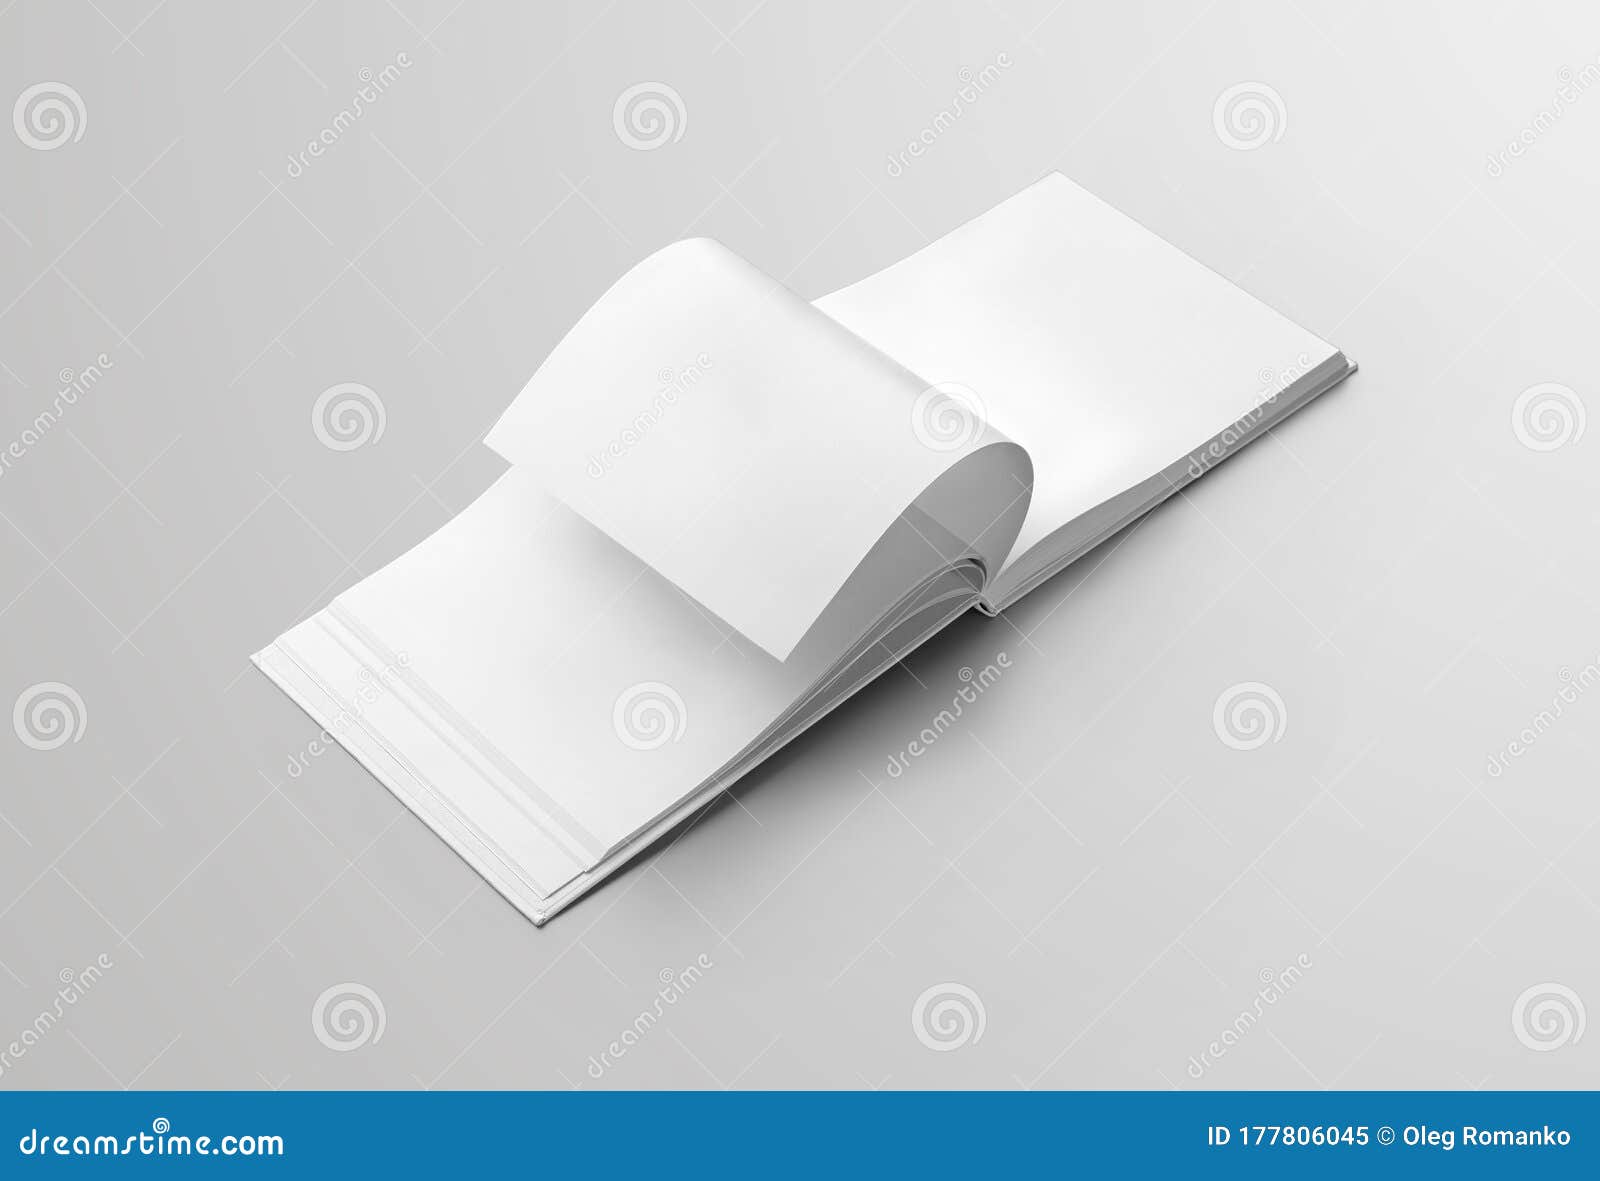 Download 155 Landscape Book Mockup Photos Free Royalty Free Stock Photos From Dreamstime